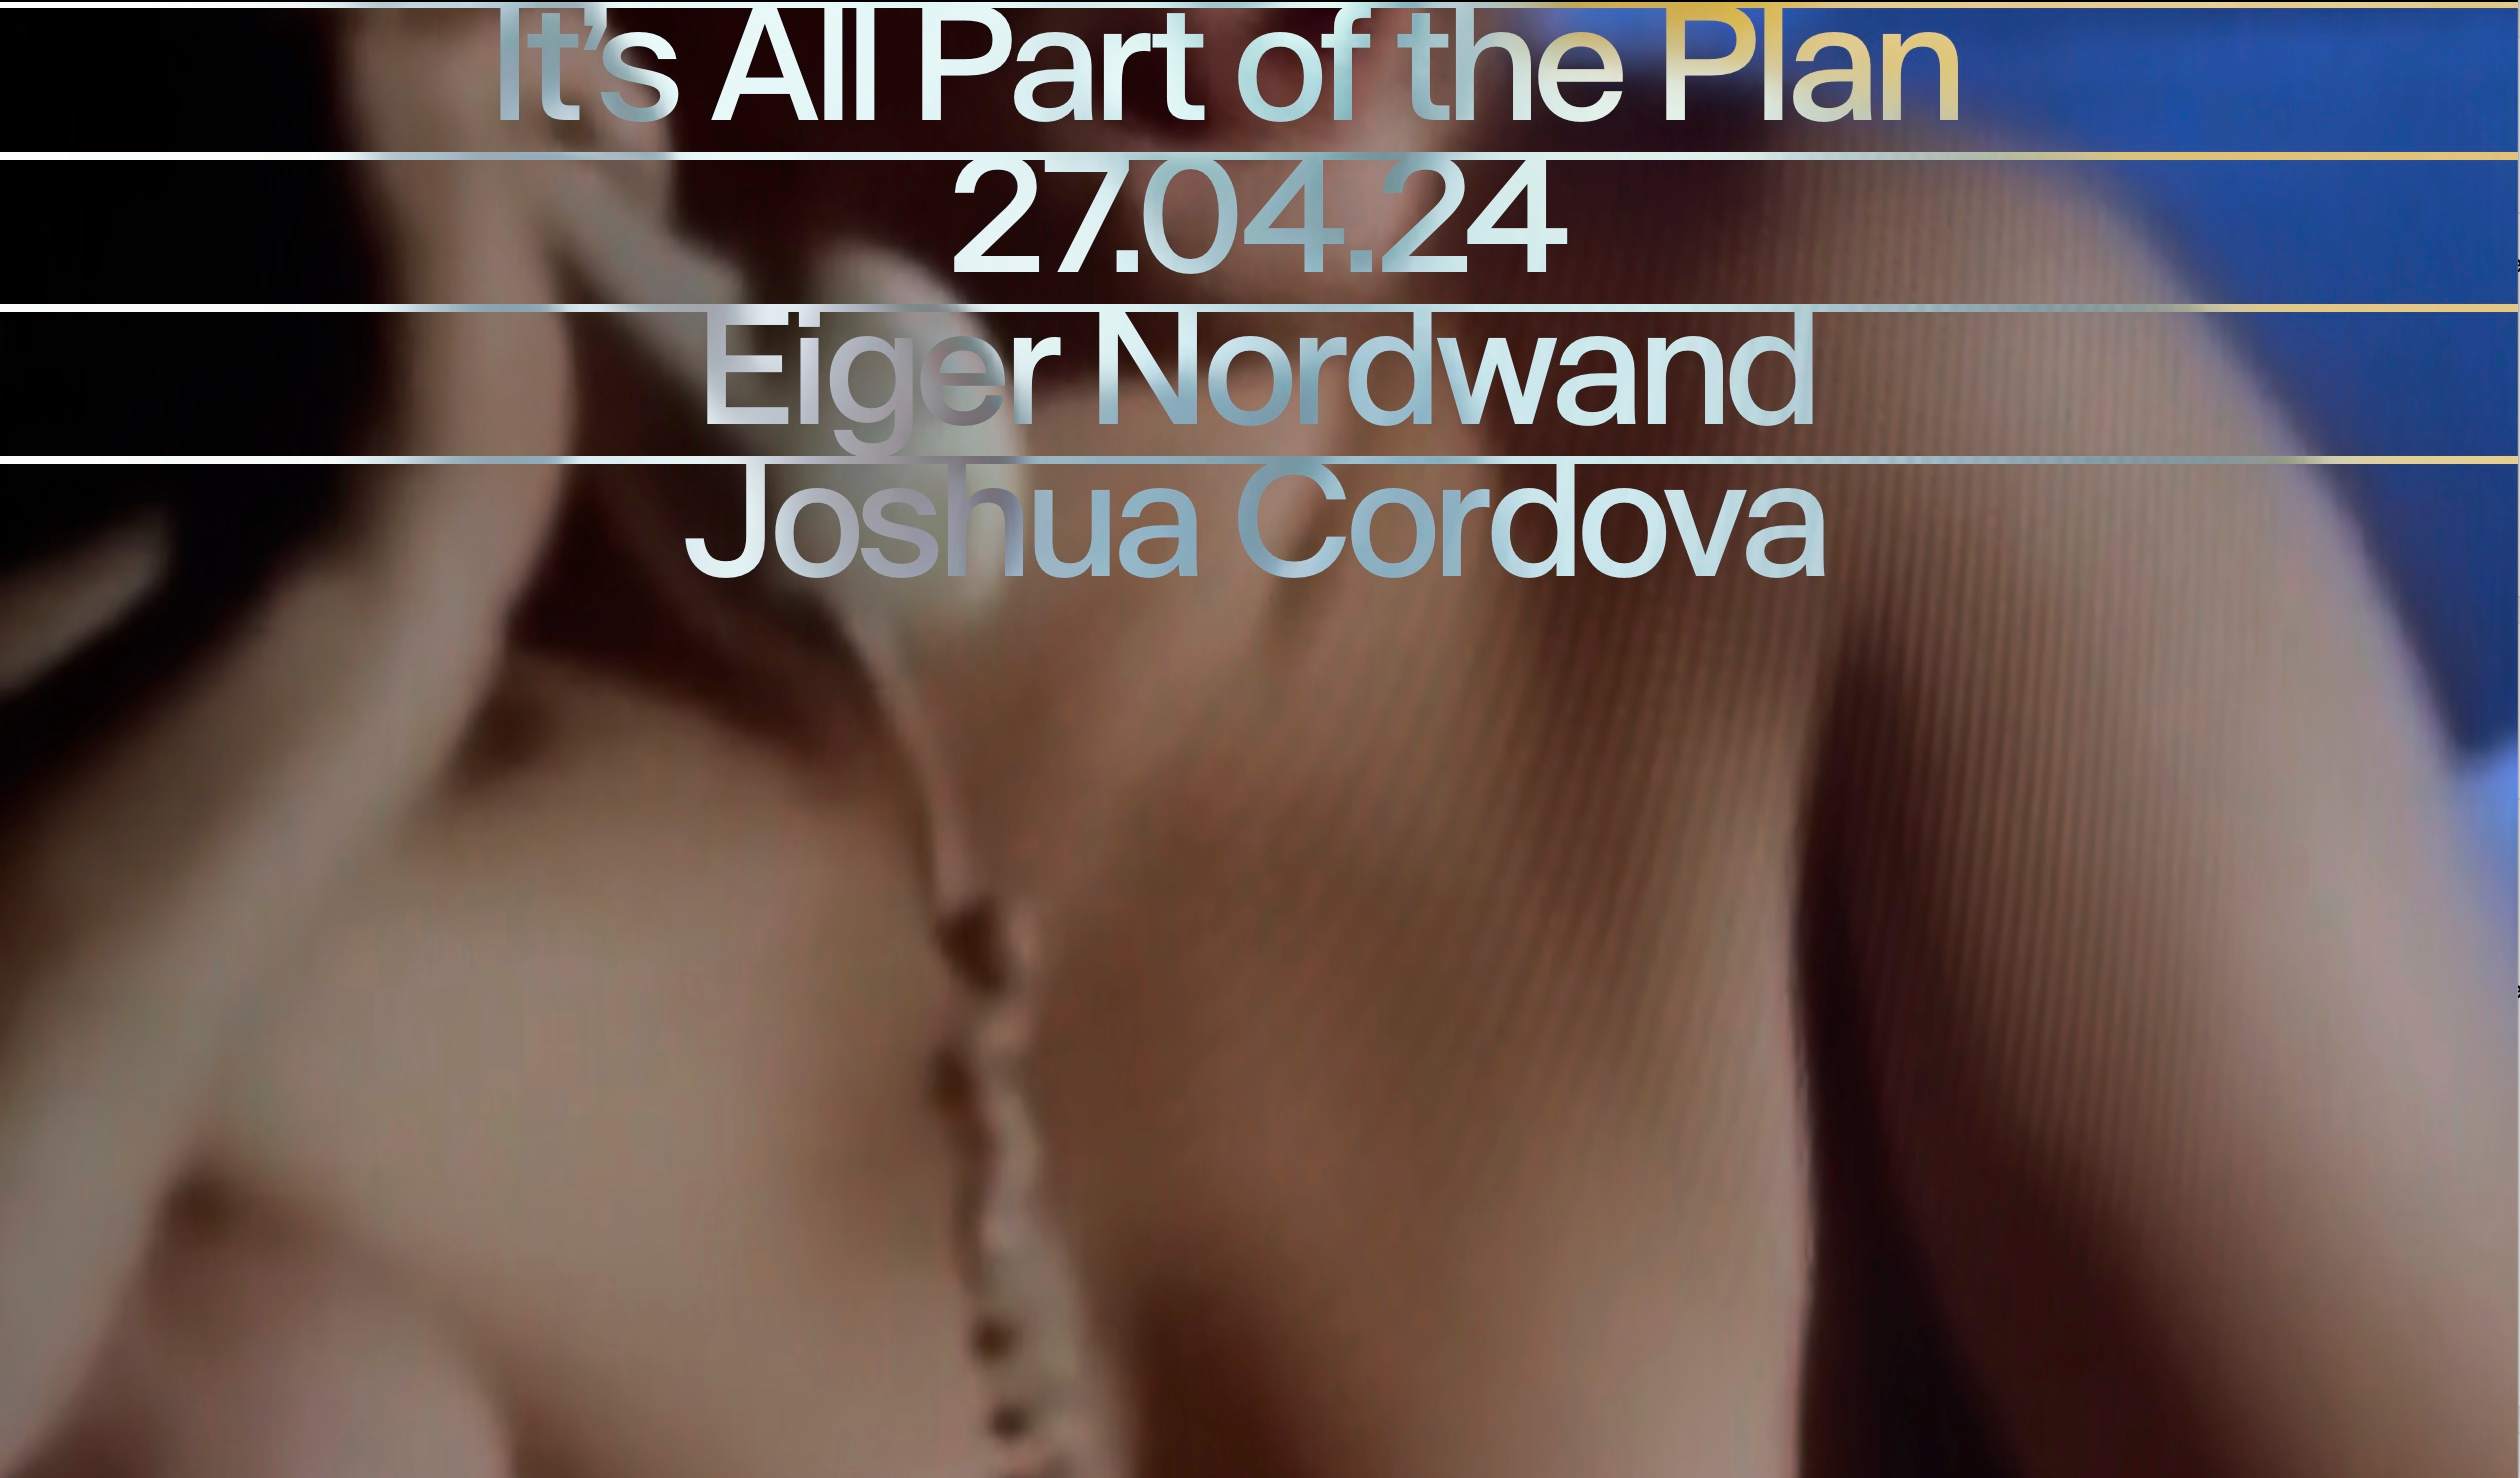 Its ALL part of the plan with Joshua Cordova b/w Eiger Nordwand - フライヤー表